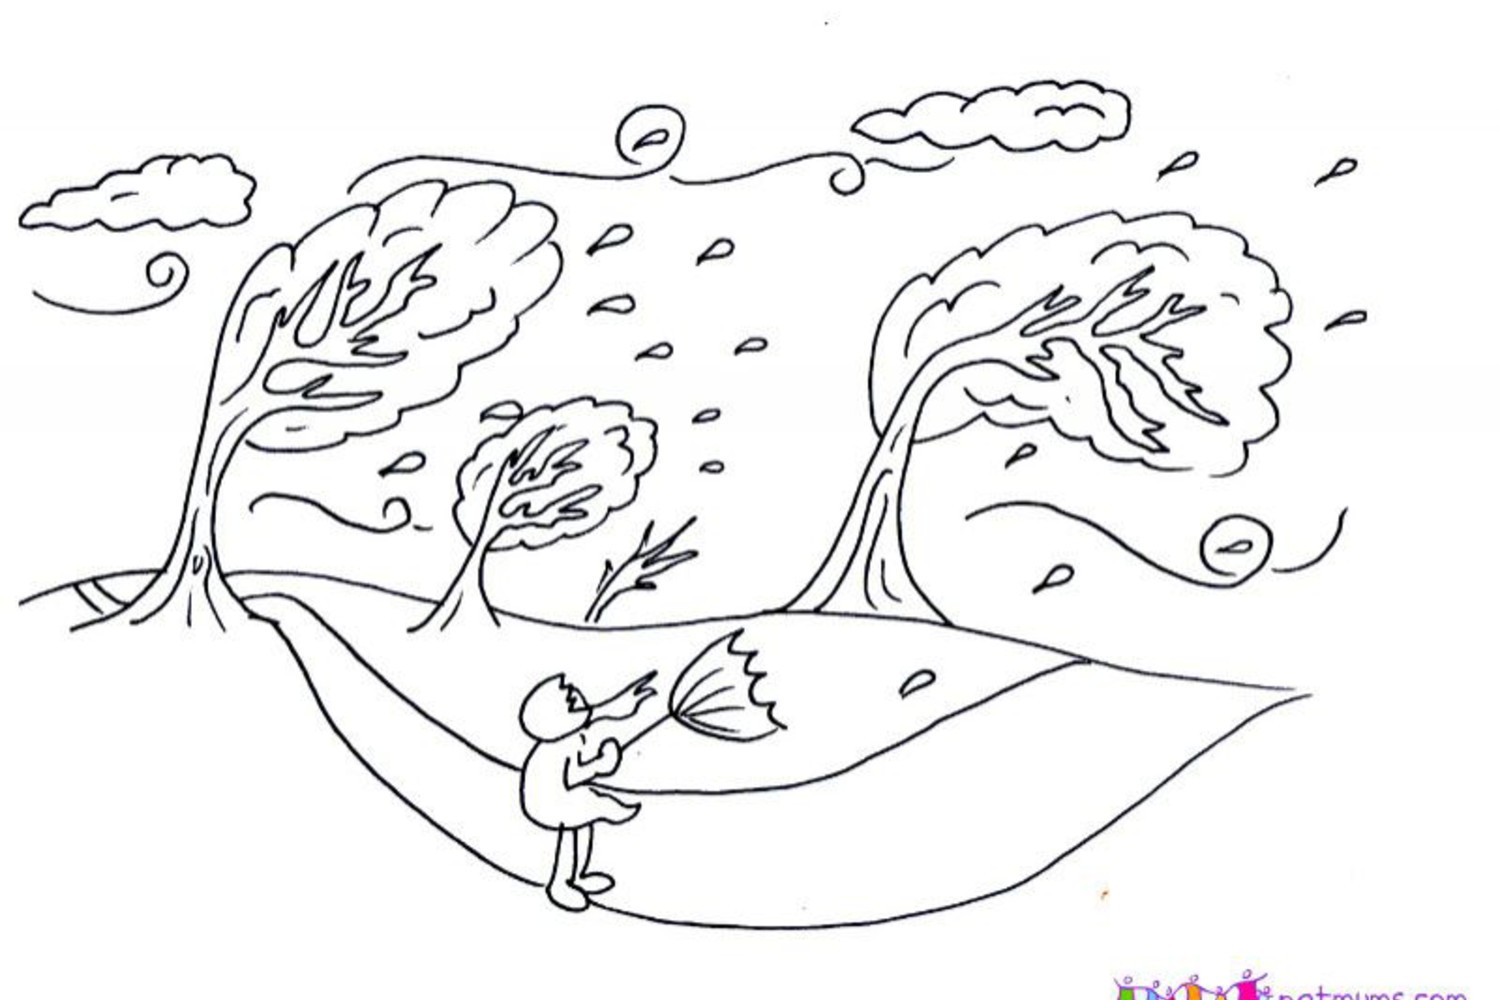 Coloring Sheets For Kids (Wind)
 Windy Day Coloring Pages